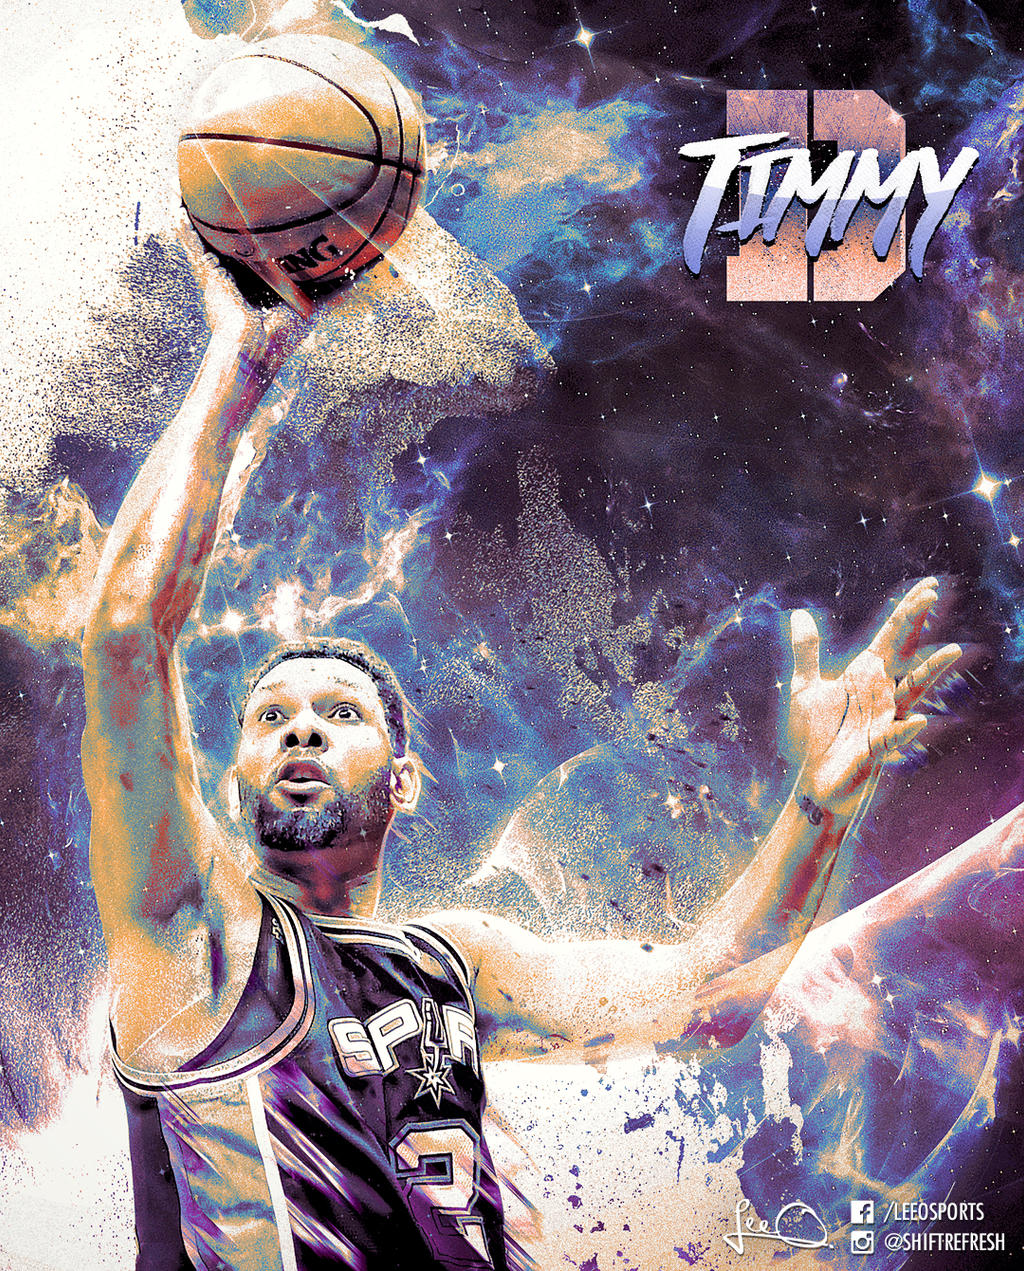 Tim Duncan Posters for Sale